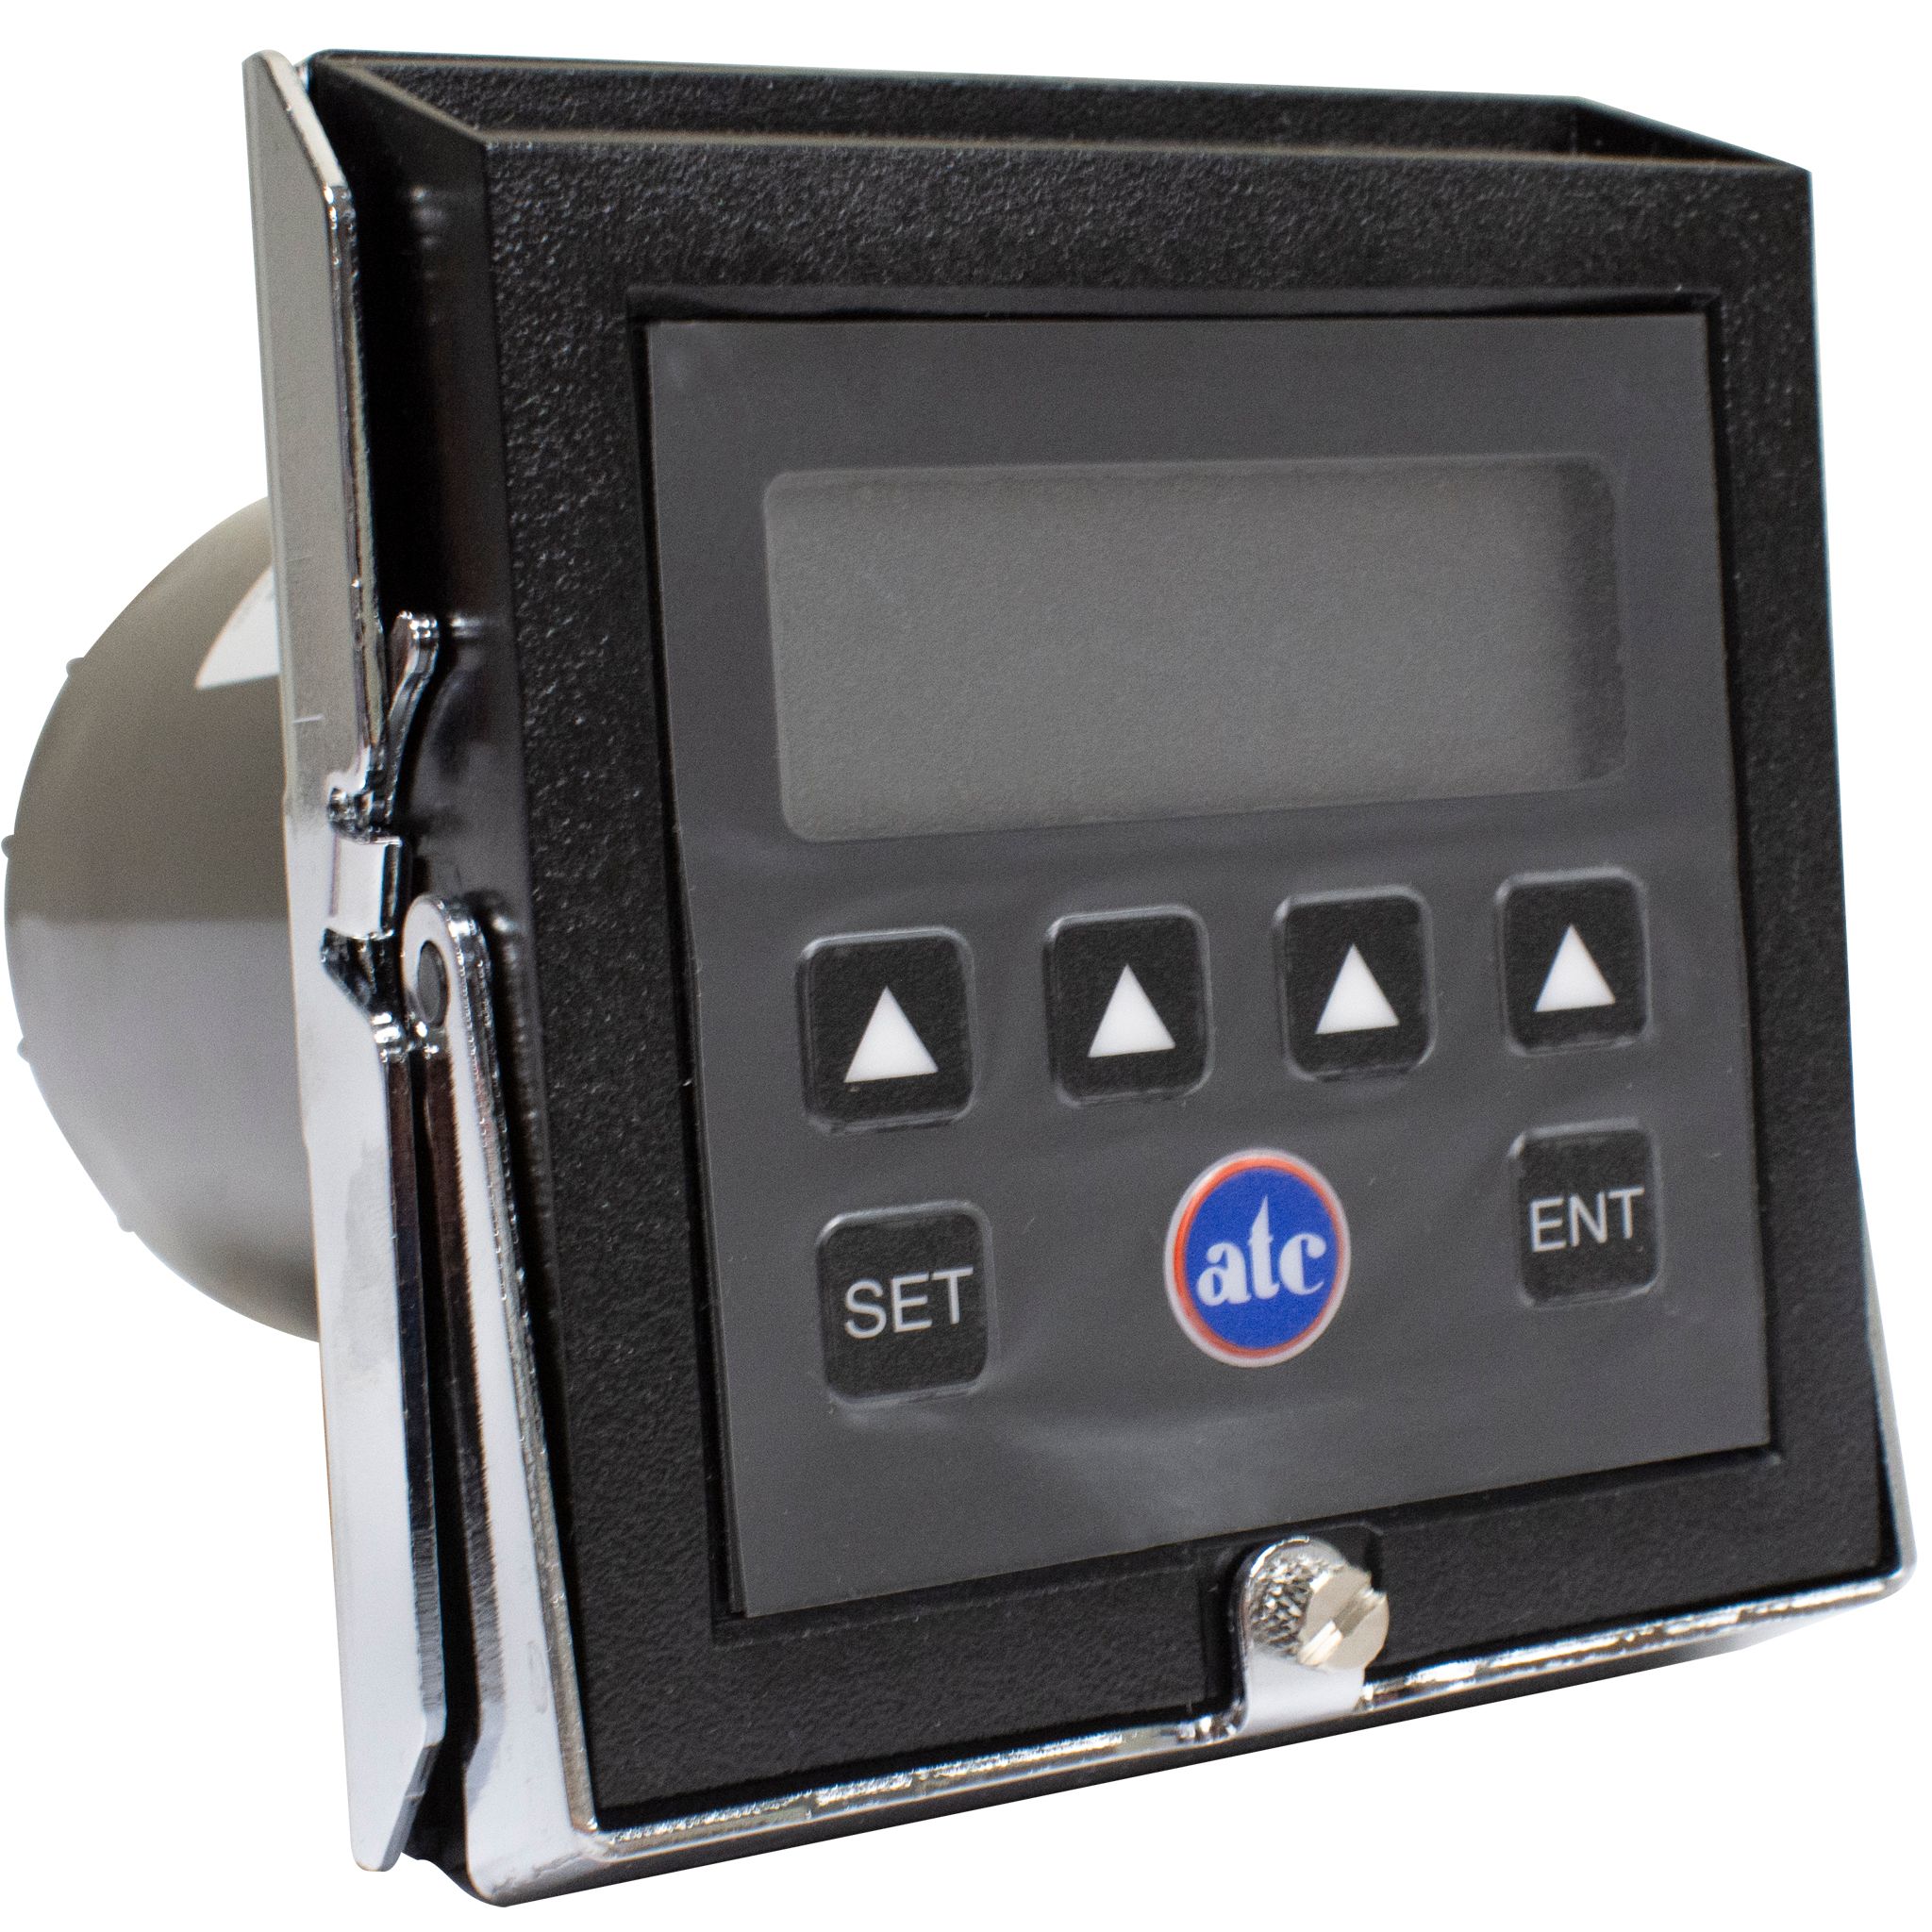 Automatic Timing & Controls 655-8-4000 655 Series Panel Mounted Digital Timer